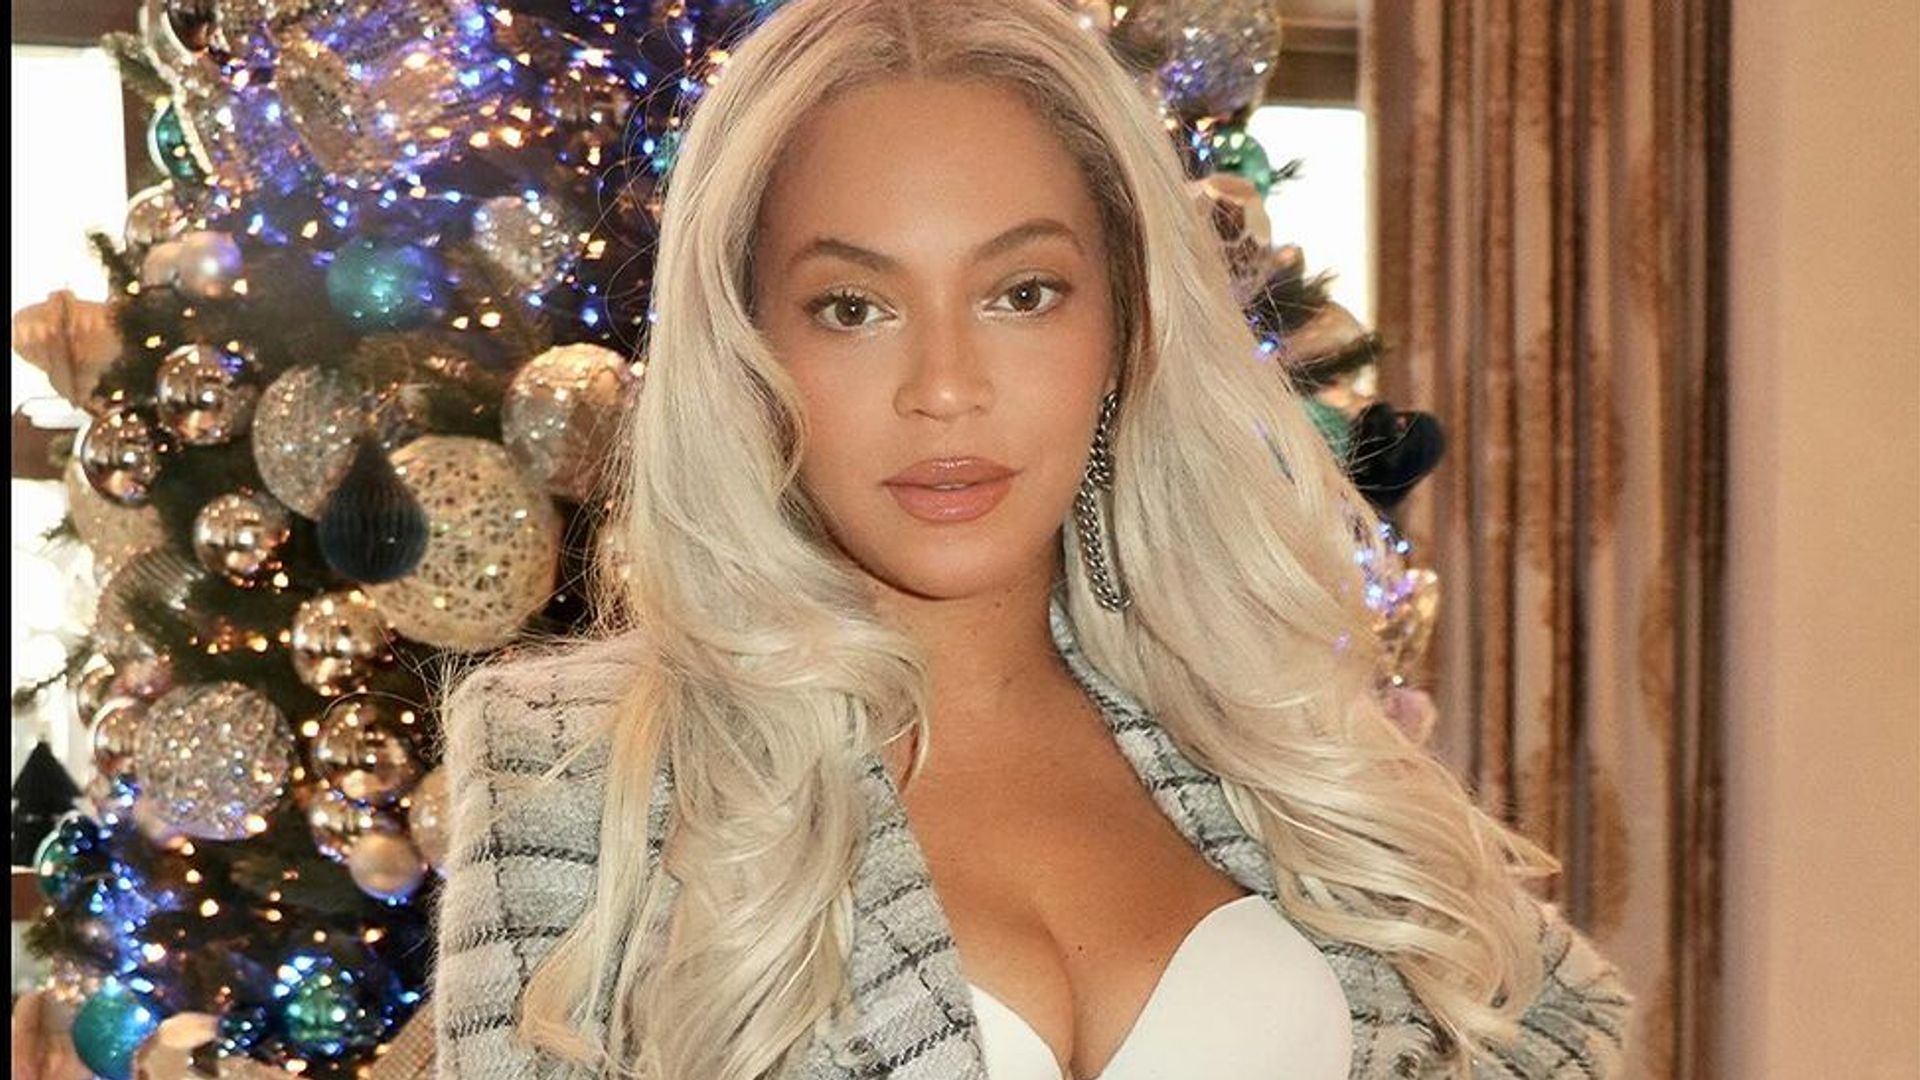 Beyonce stuns in plunging corset and mini skirt for leggy New Year's Eve look #Beyonce